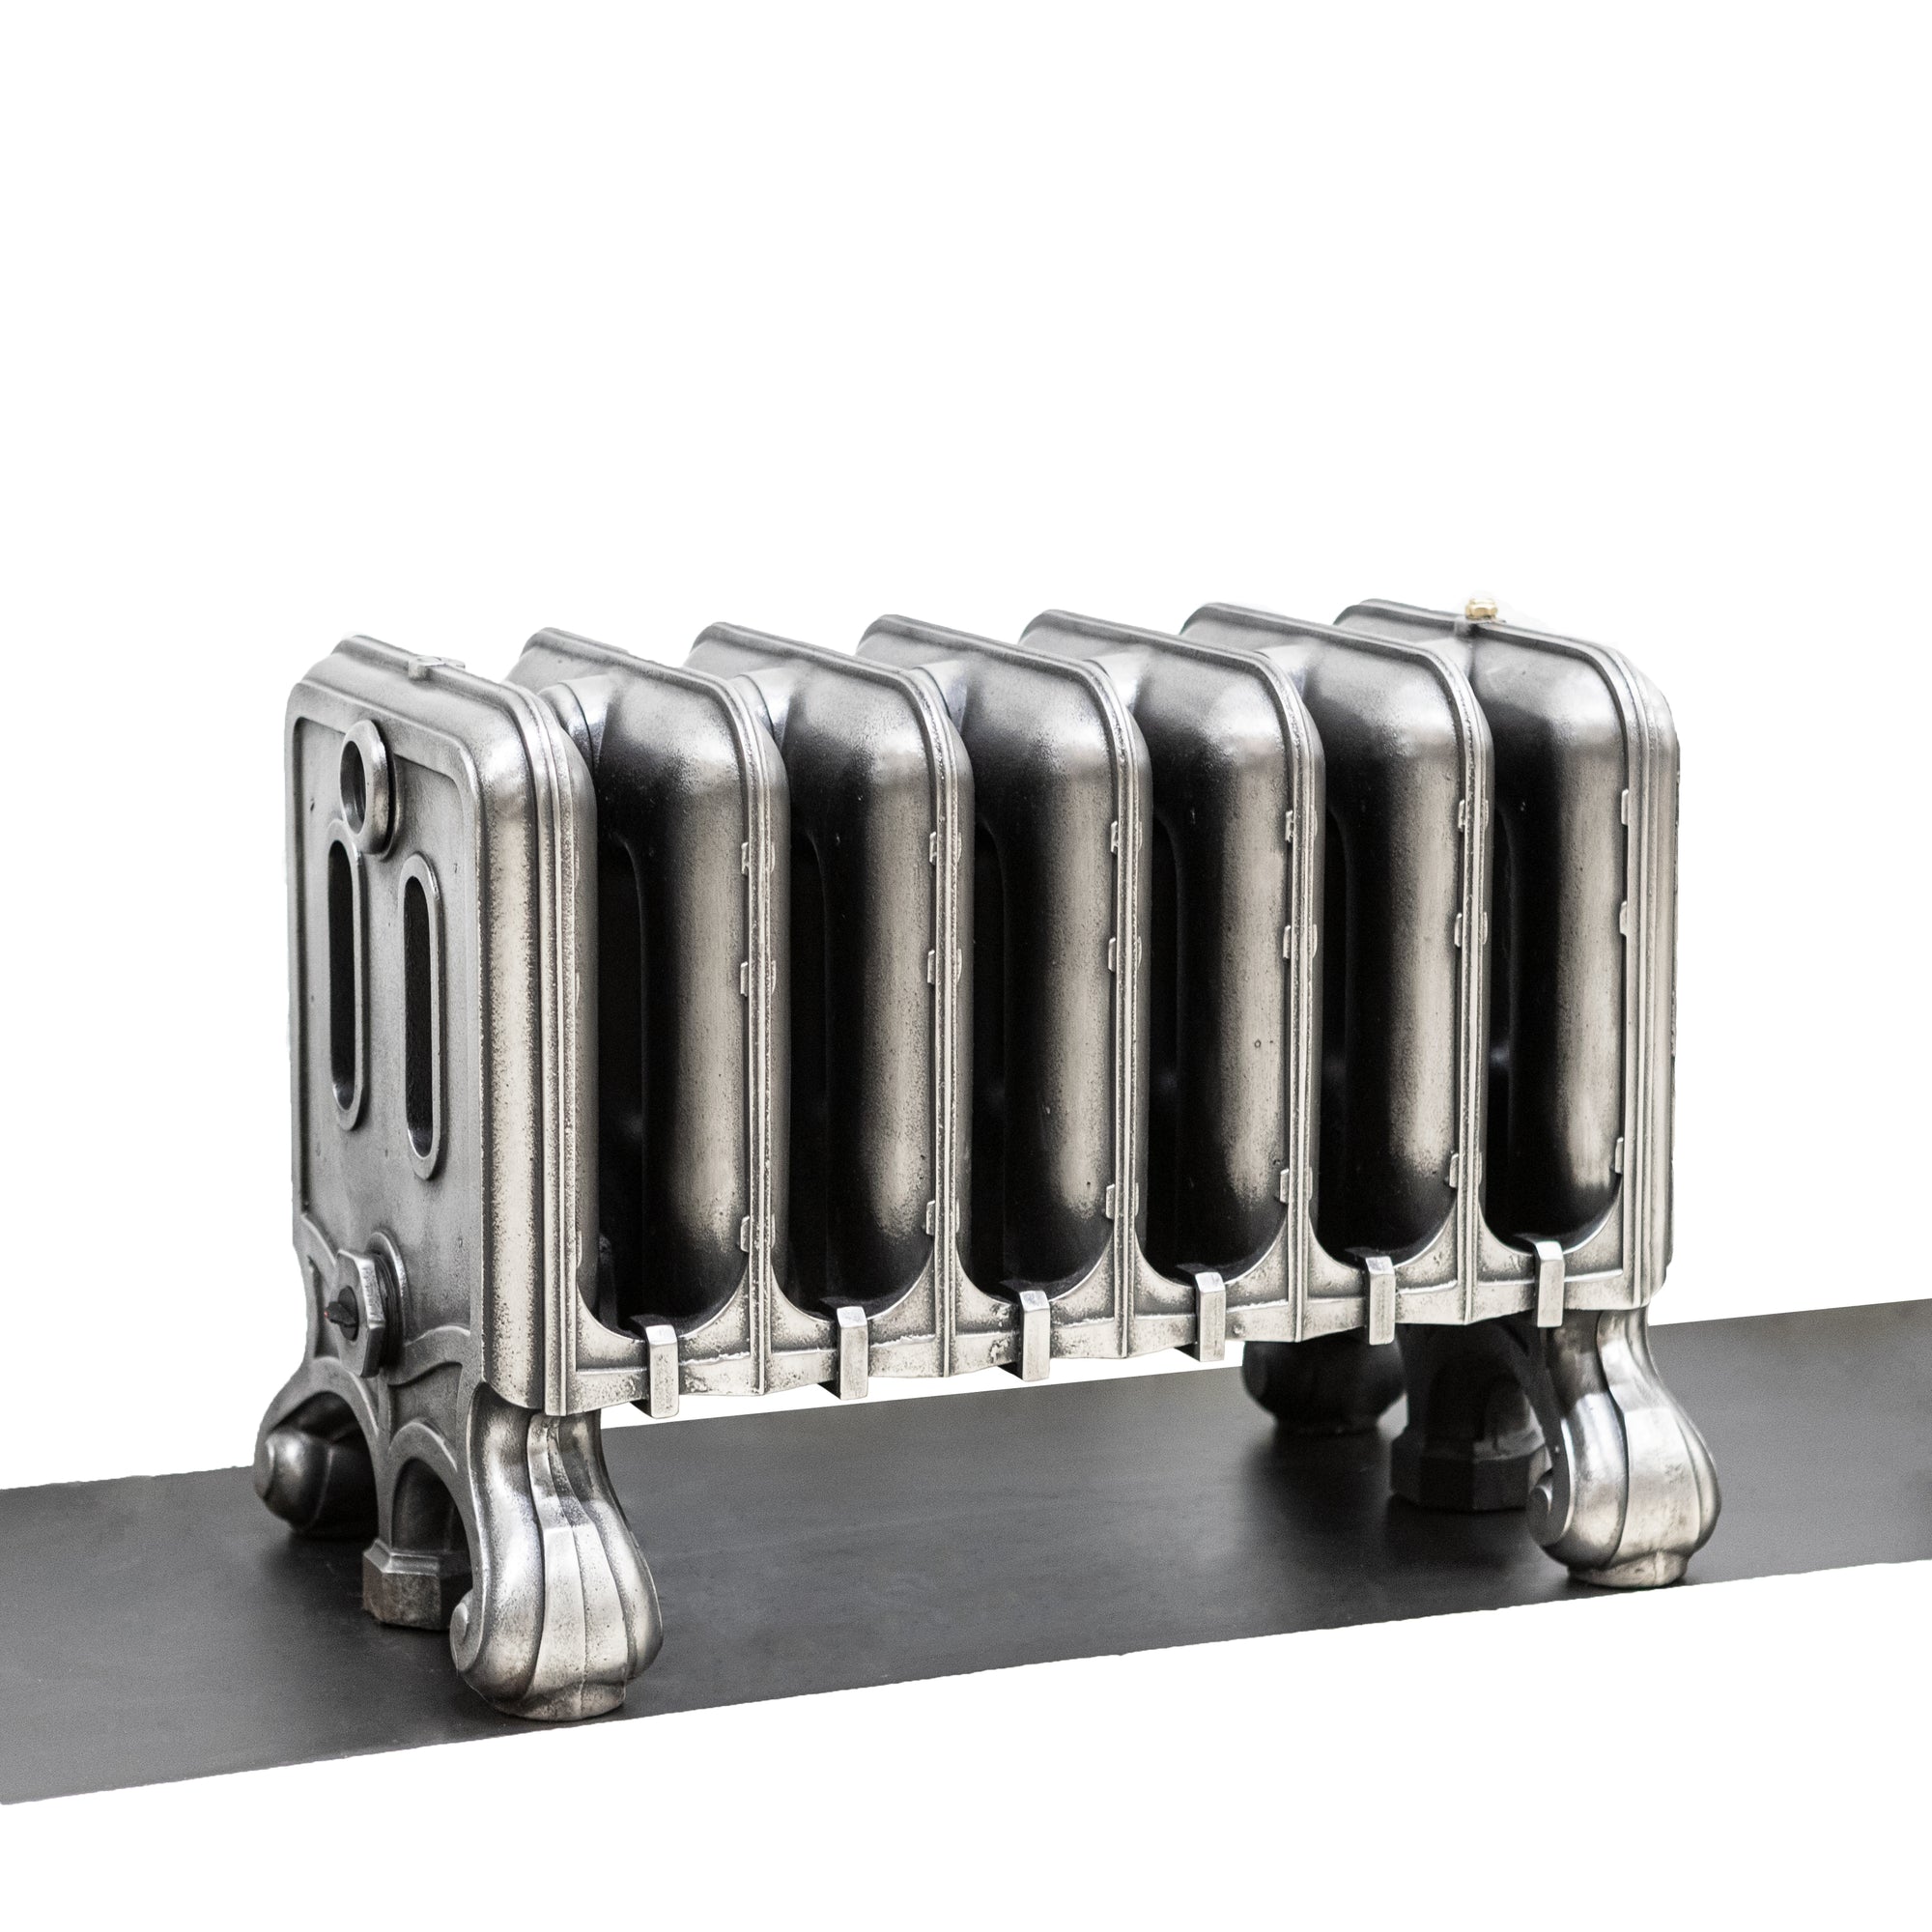 Rare Antique Hand Polished Cast Iron Radiator | 7 Sections | The Architectural Forum